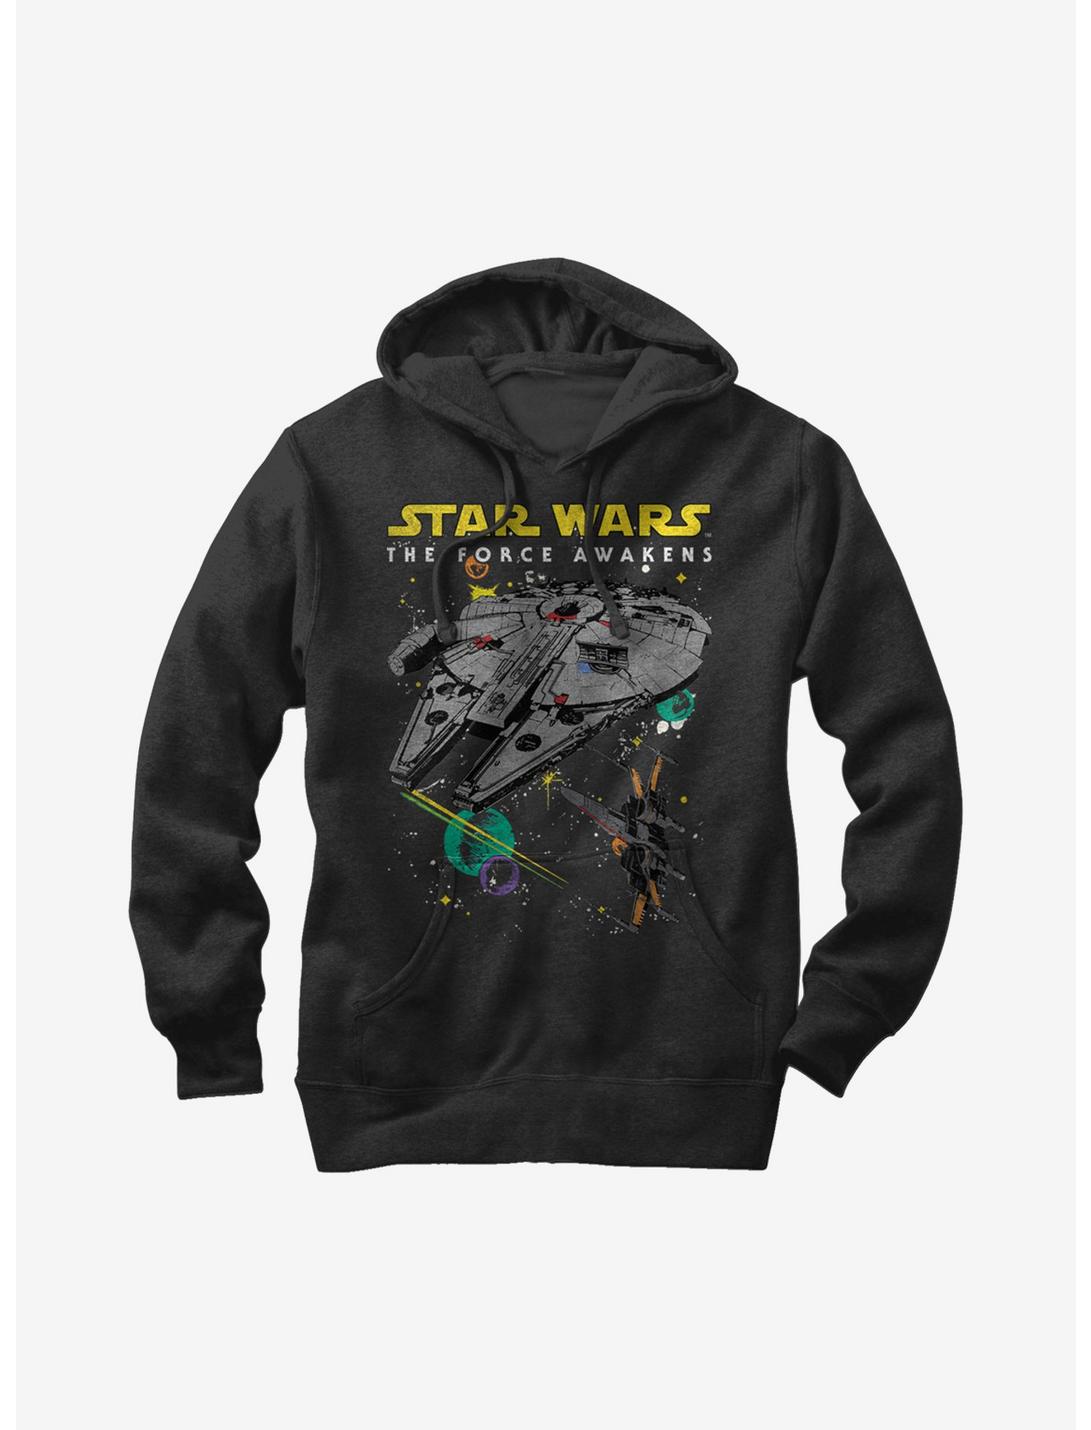 Star Wars Episode VII The Force Awakens Millennium Falcon and X-Wing Hoodie, BLACK, hi-res